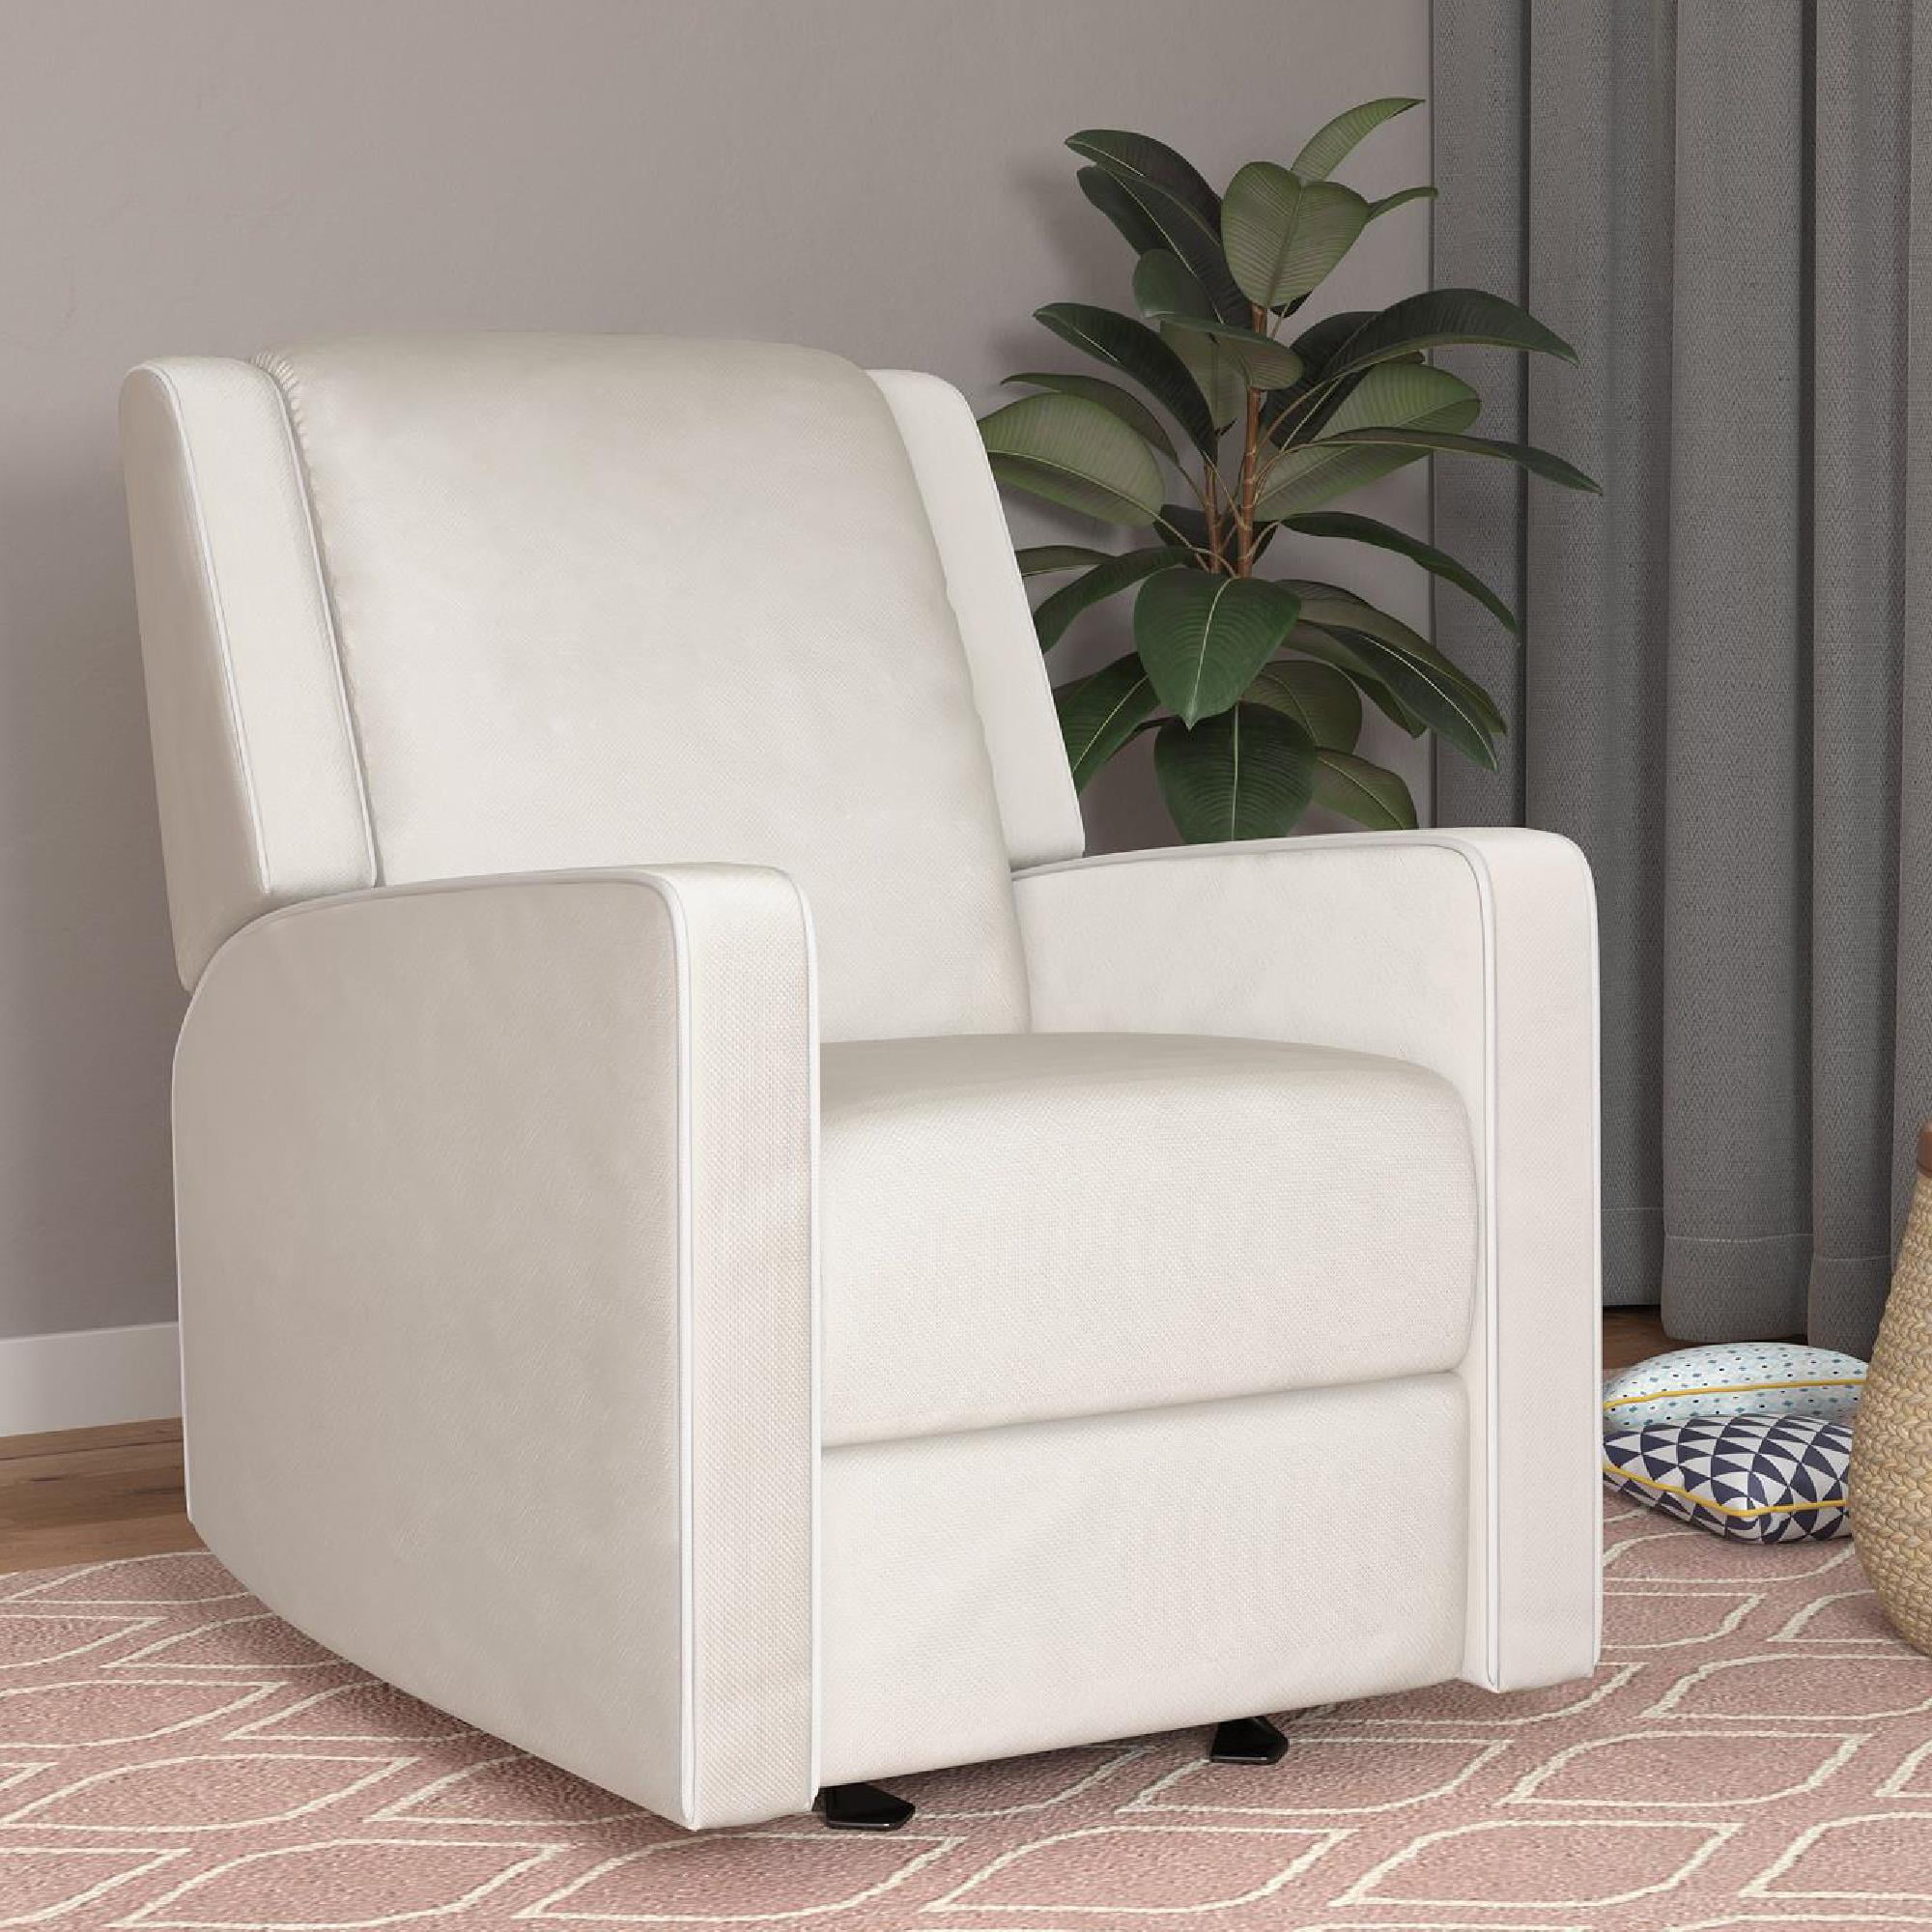 Baby Relax Robyn Rocker Recliner Chair with Pocket Coil Seating, White Linen